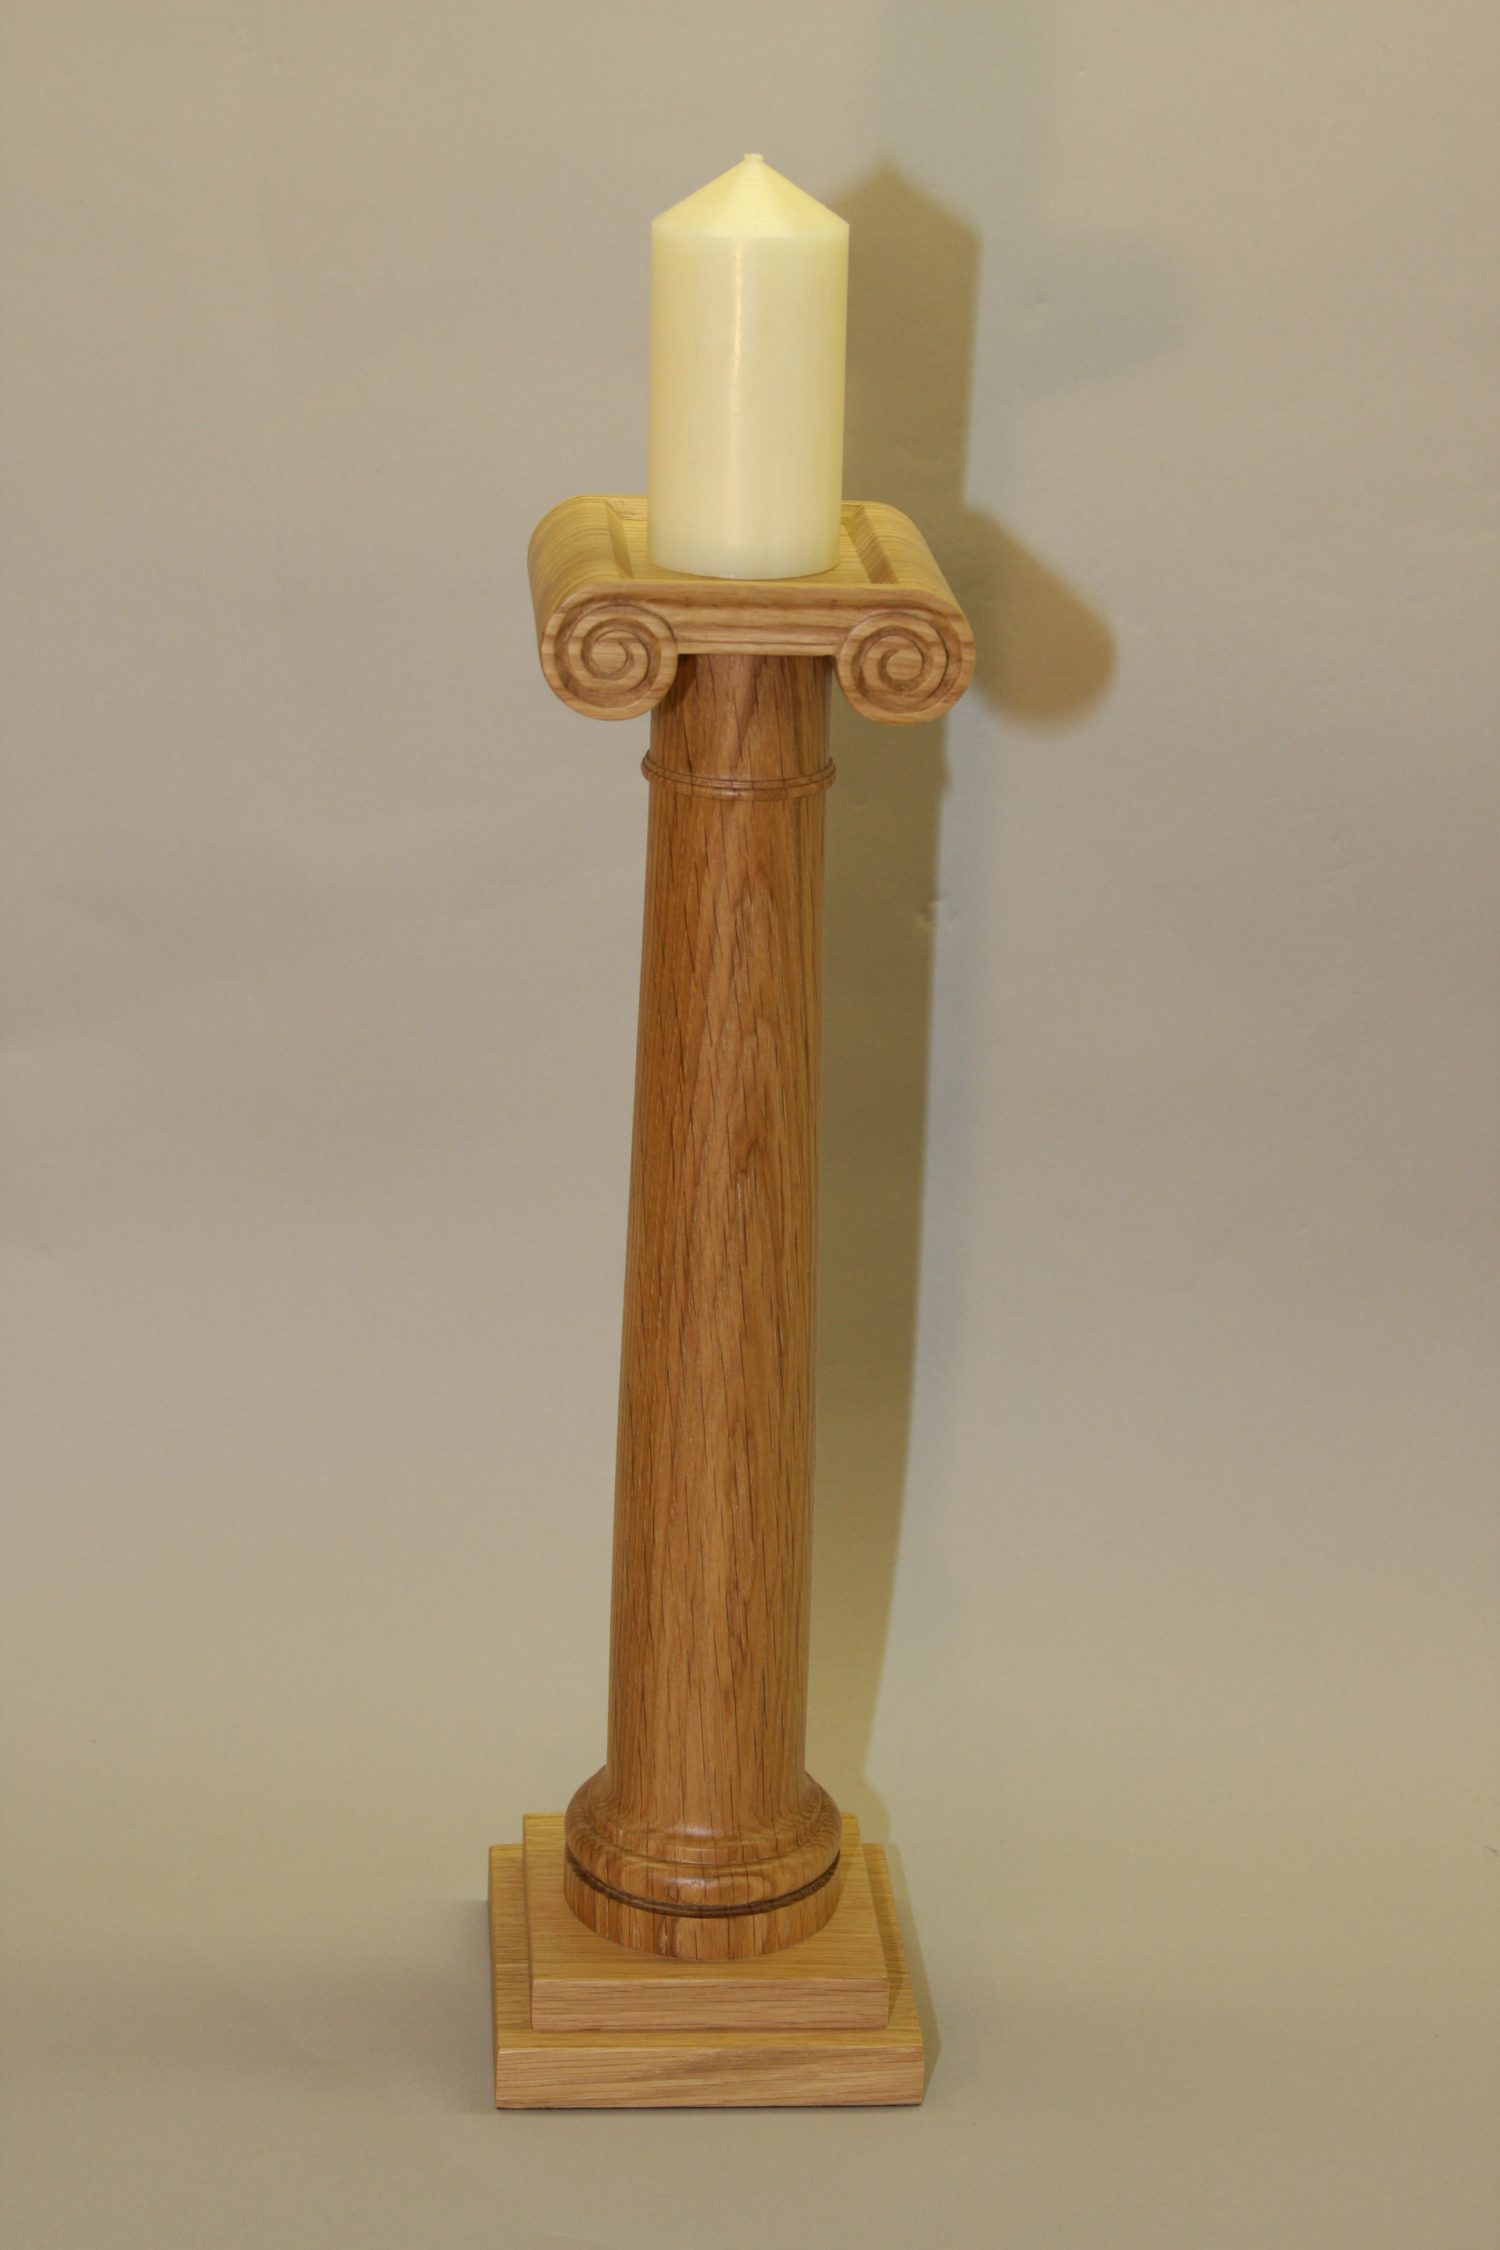 Showing Candle Drip Tray